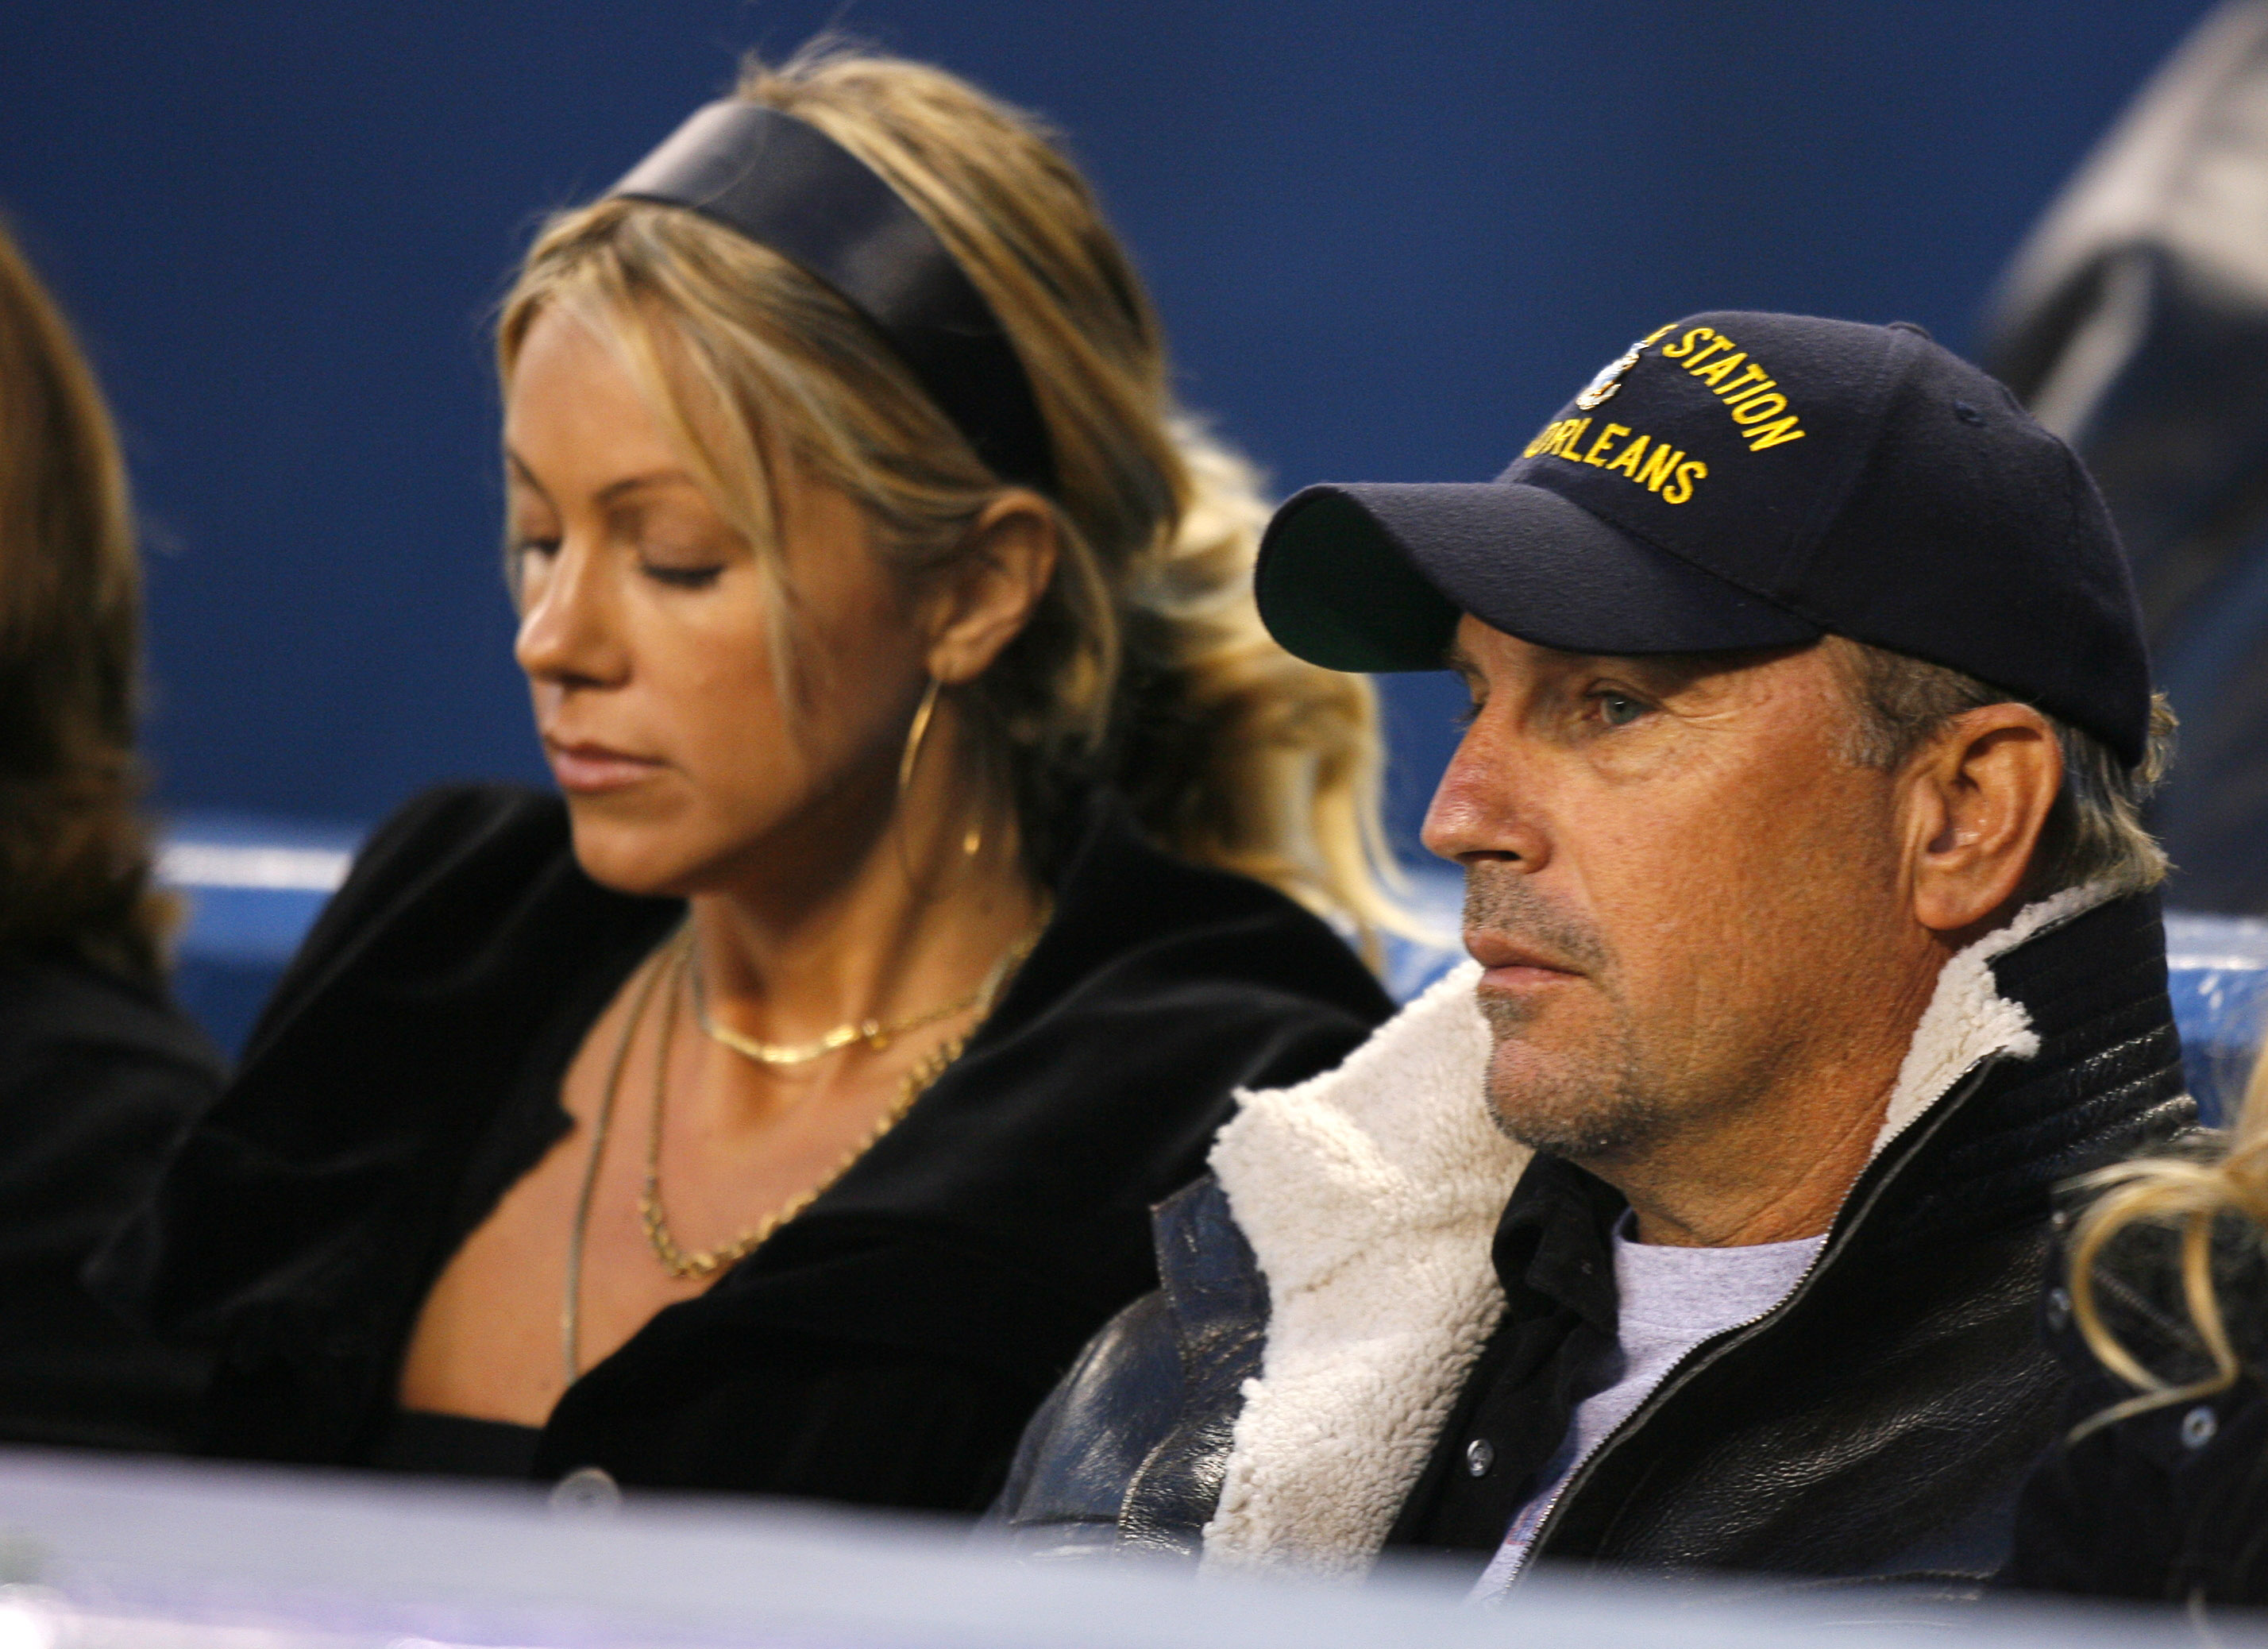 Kevin Costner and his wife, Christine at a New York Yankees versus Tampa Bay Devil Rays game at Yankee Stadium in the Bronx, NY | Source: Getty Images